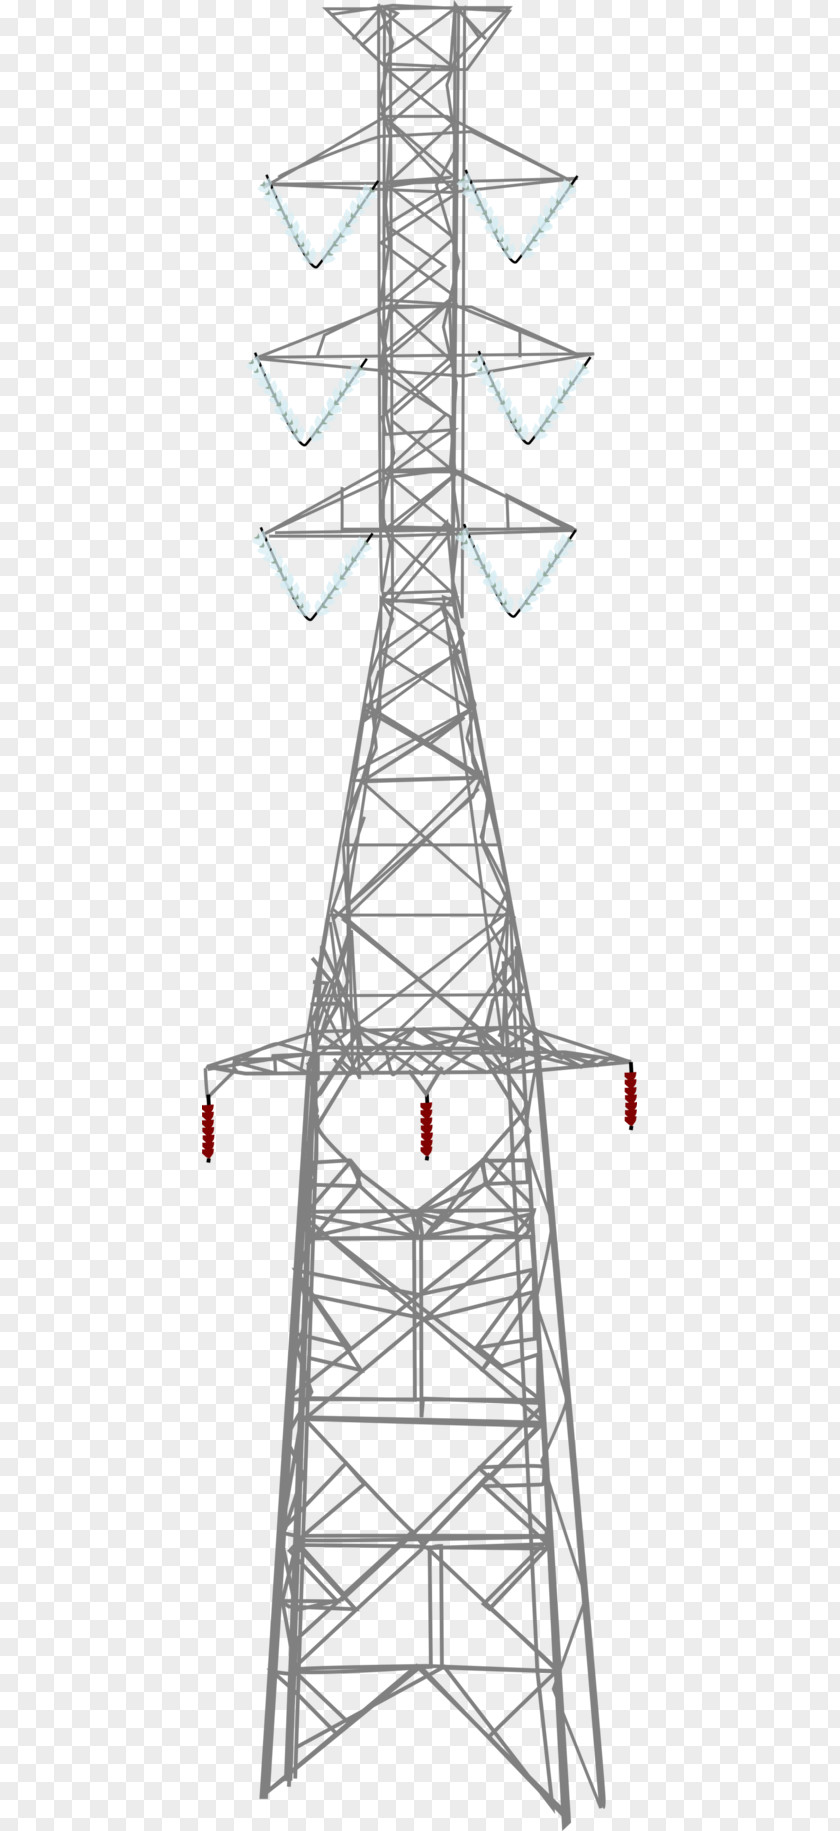 Tower Power Drawing Product Design Public Utility /m/02csf PNG